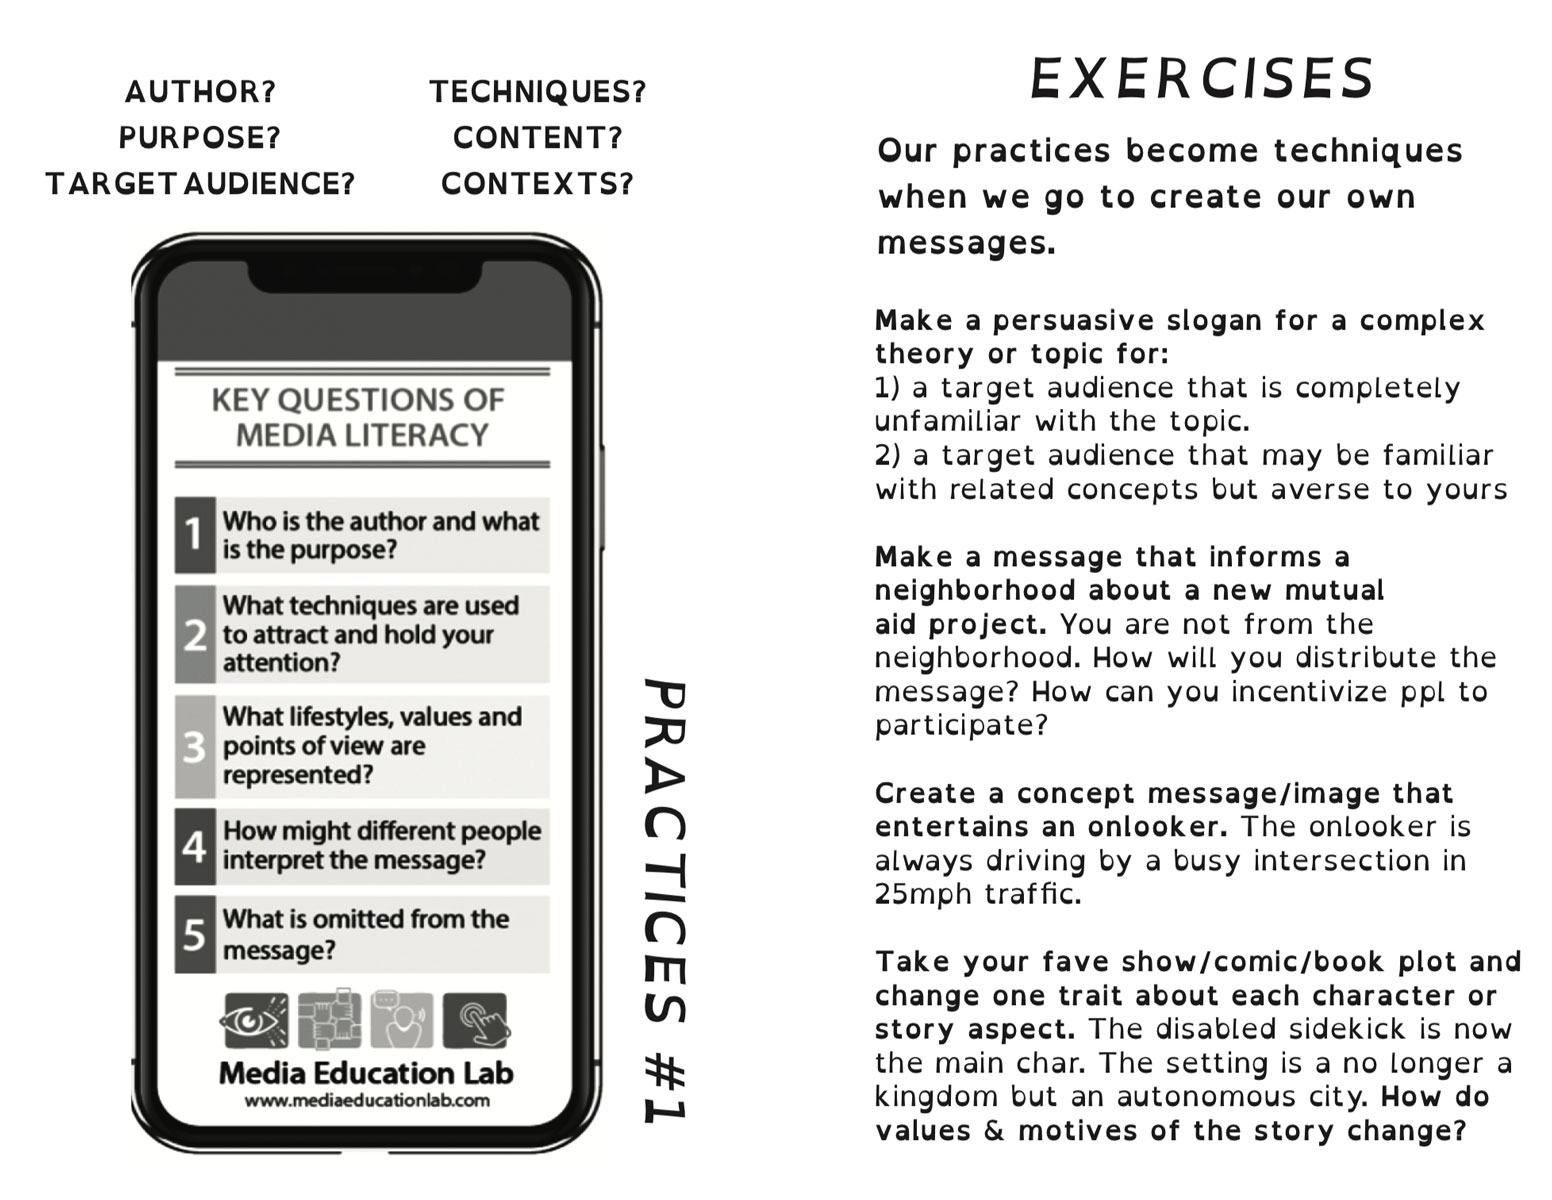 A screencapture of the interior practices & exercises from the booklet PDF